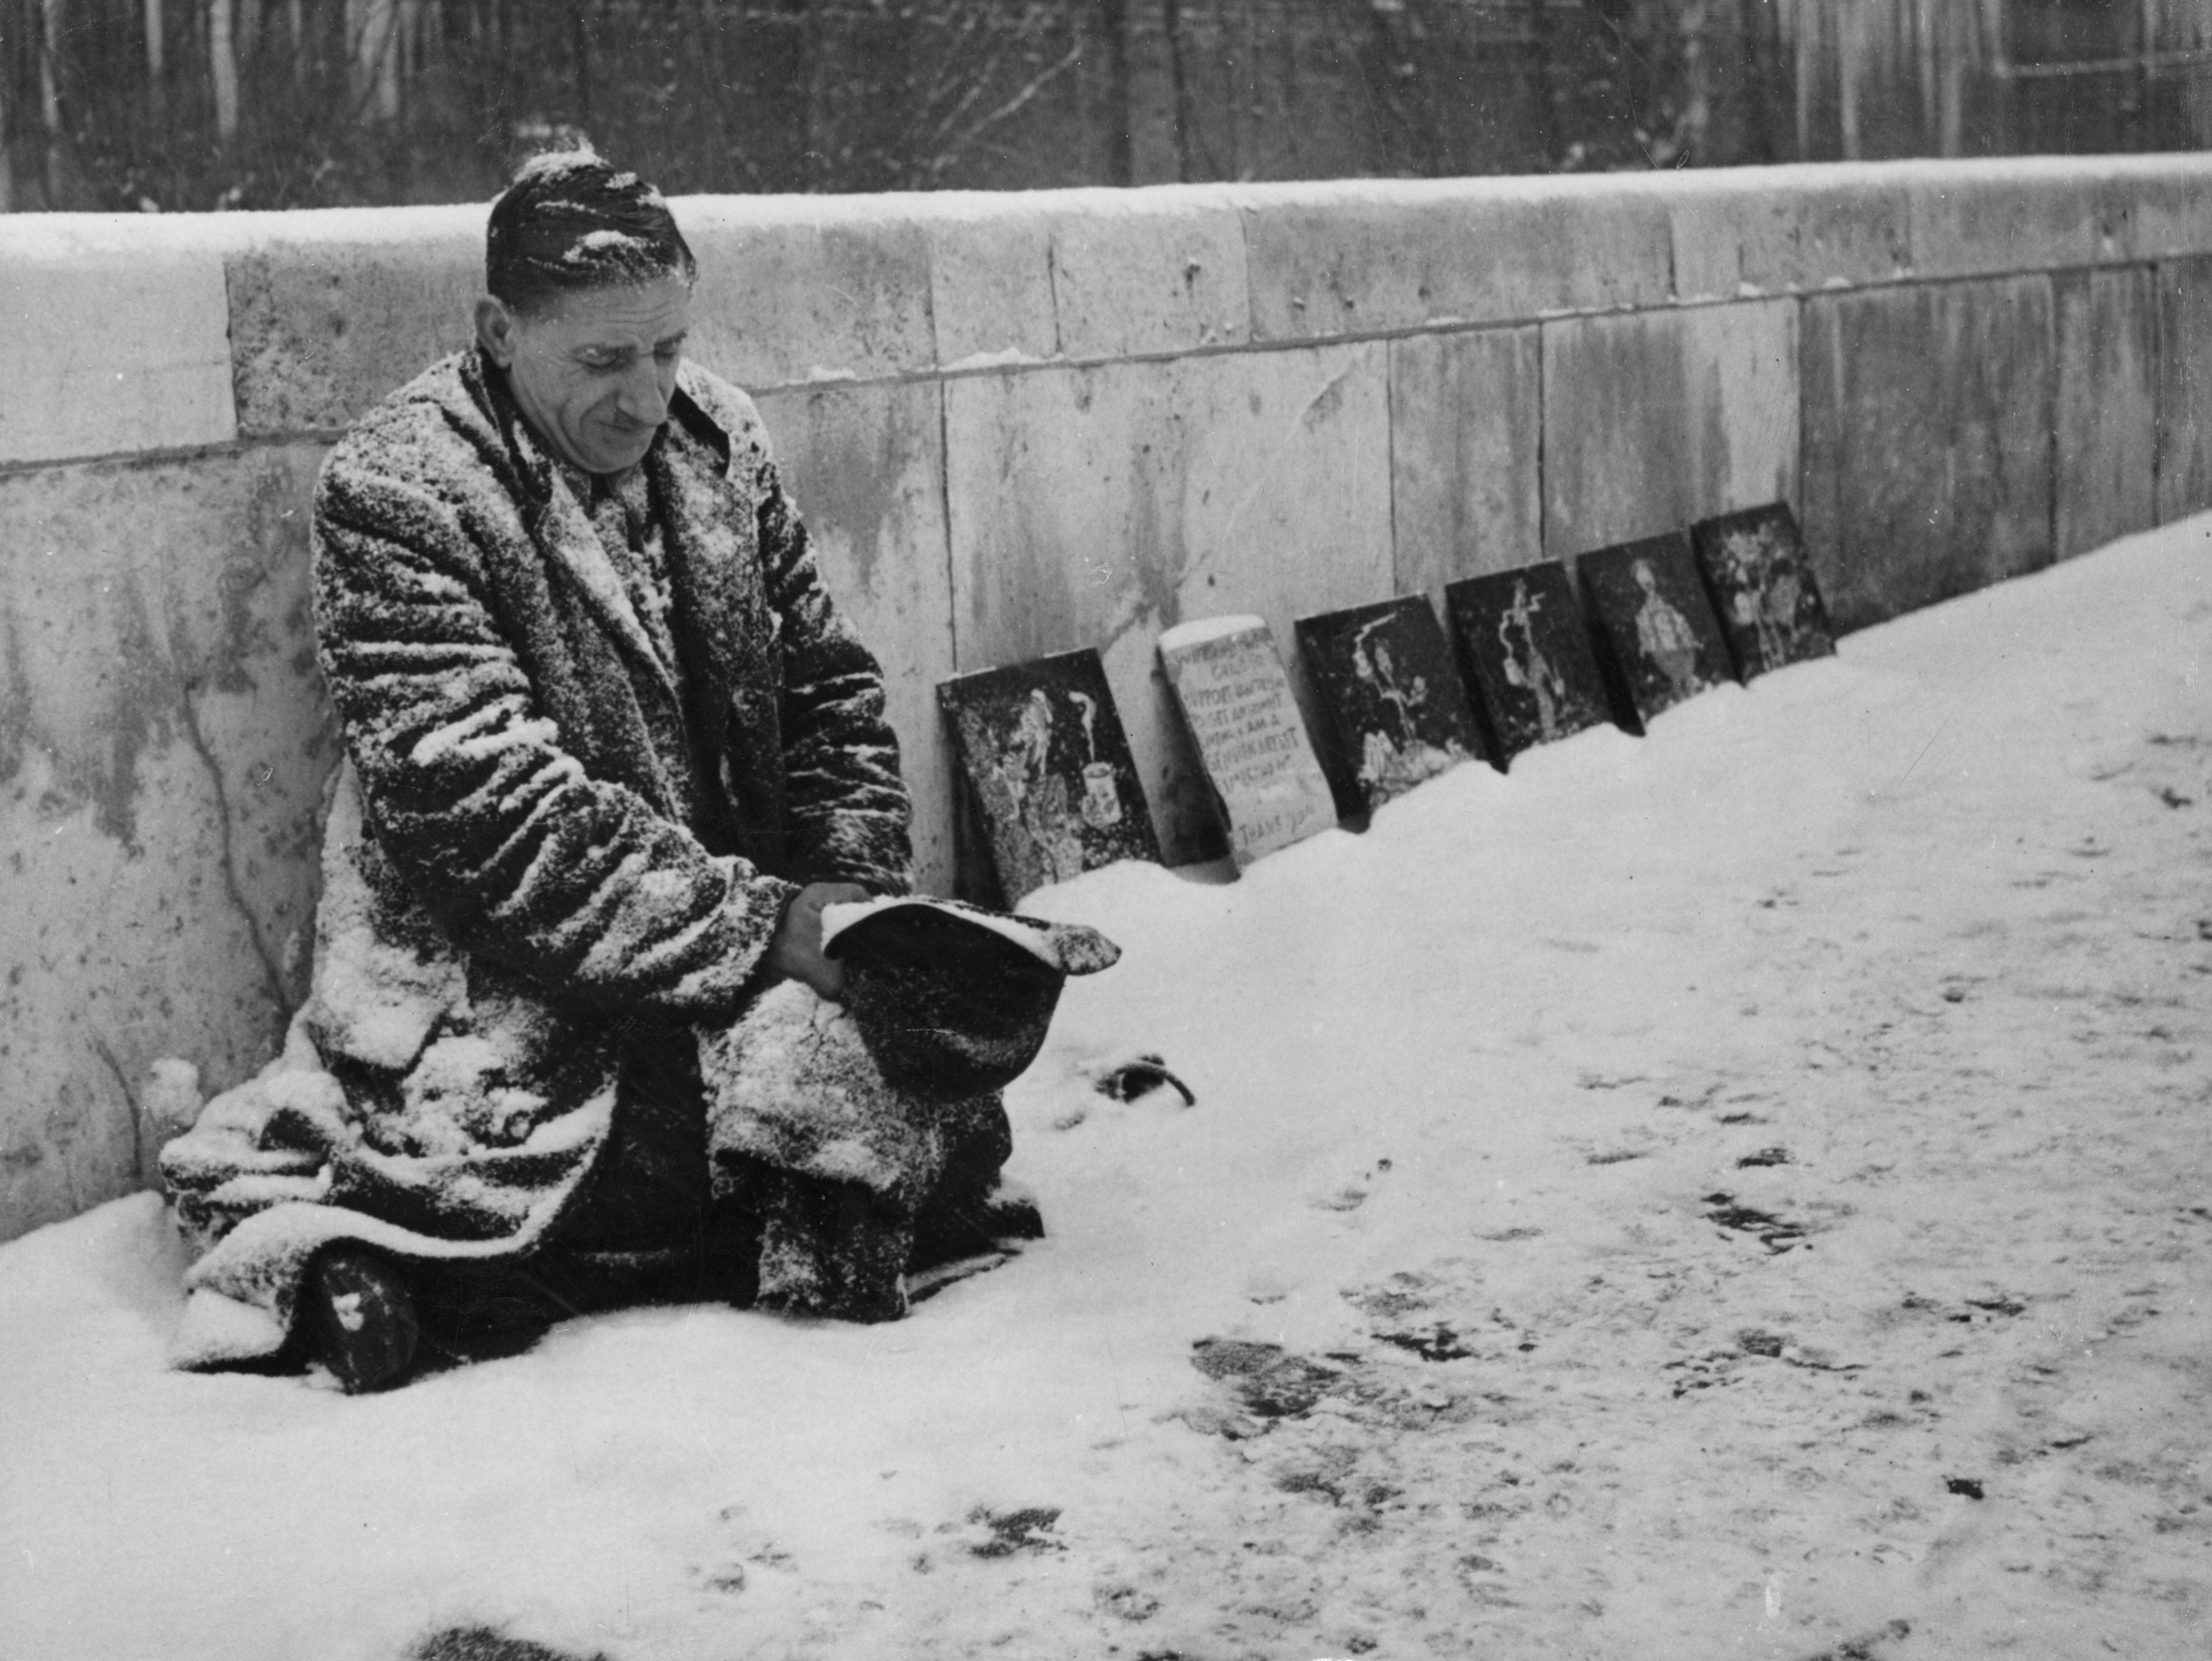 Albert Stewart, a pavement artist, on his snow-covered pitch outside the National Gallery in London in 1947